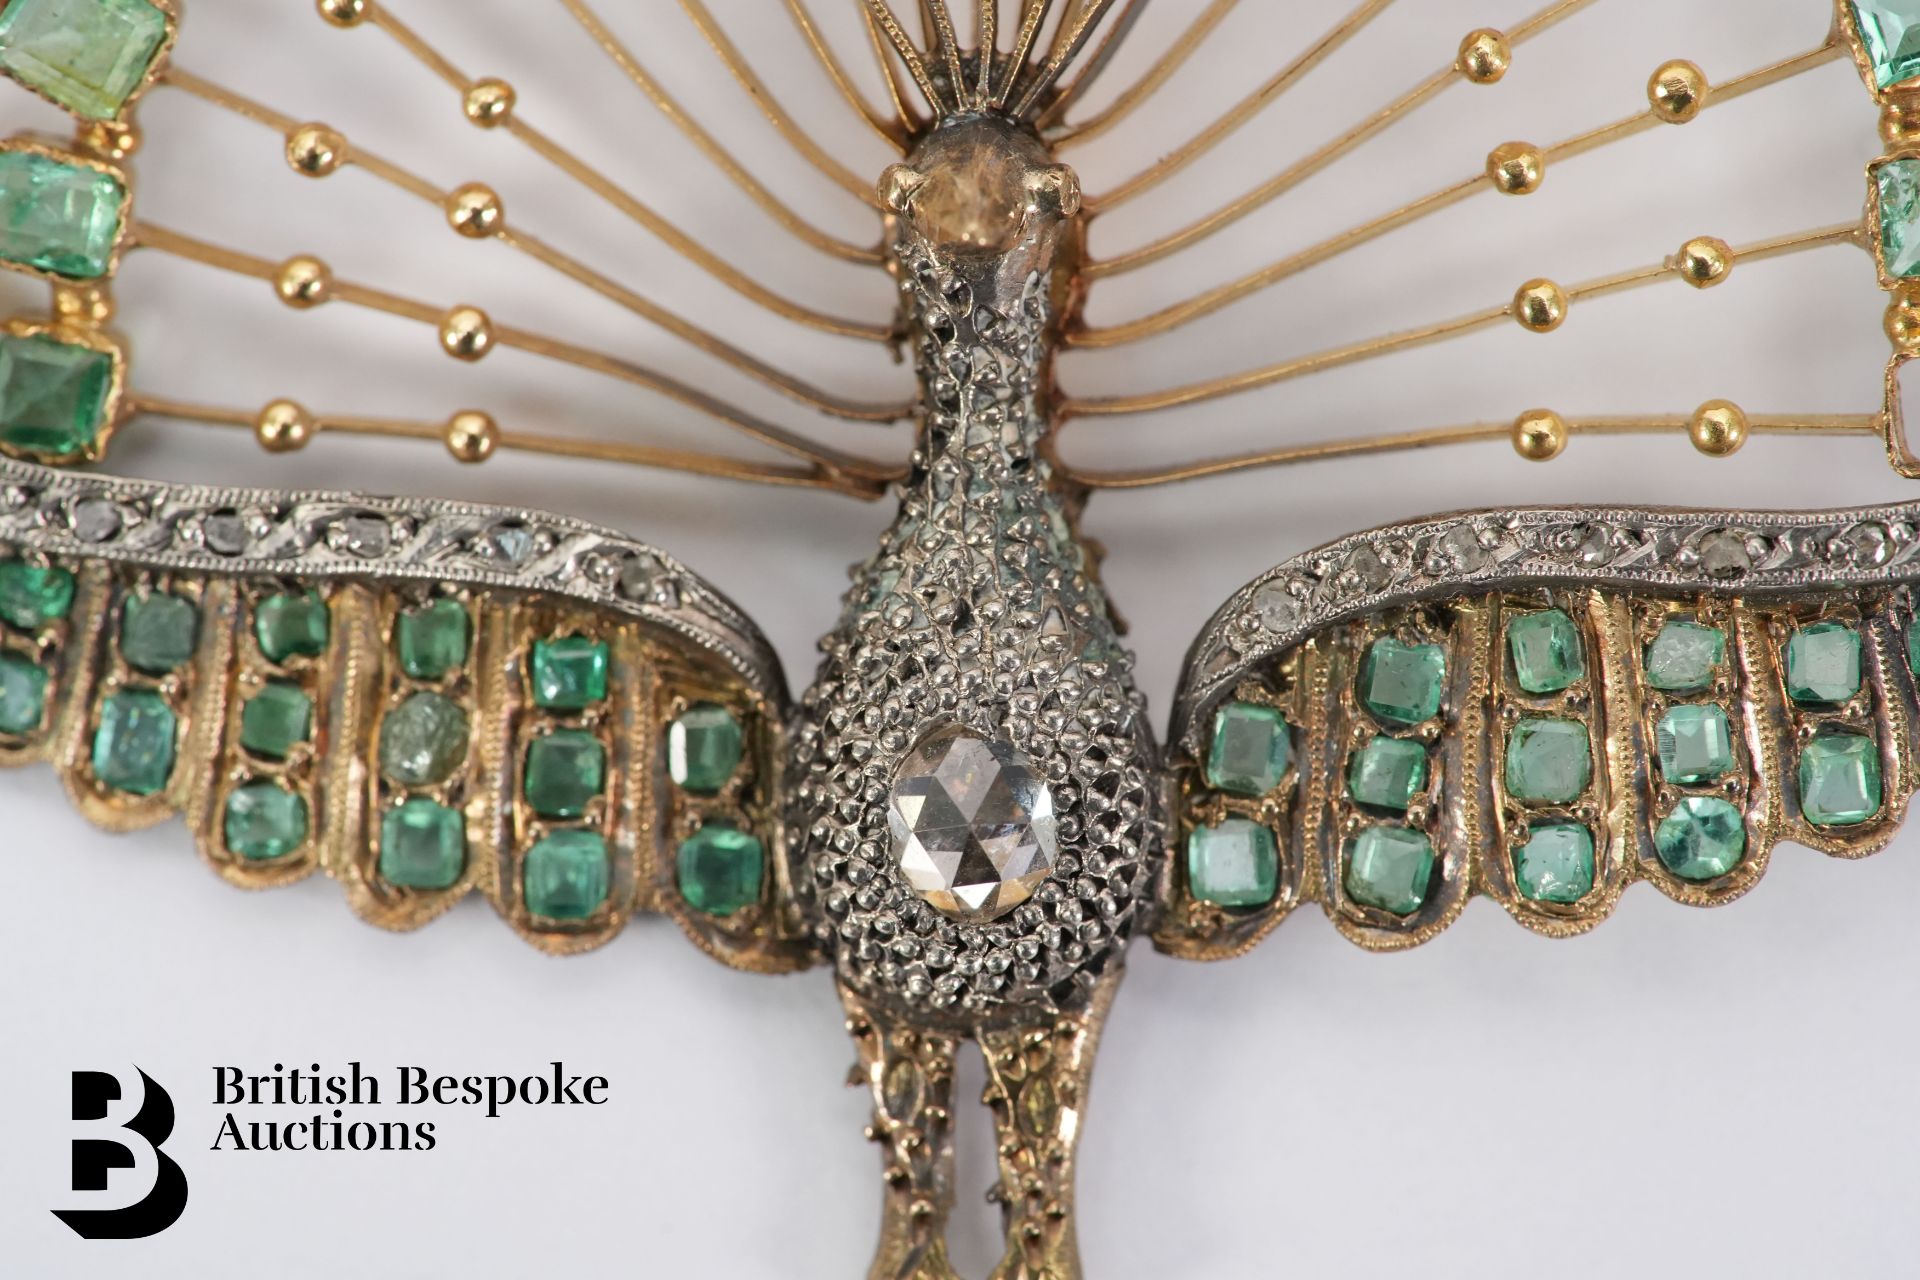 Victorian 18ct Gold Egyptian Revival Emerald, Diamond and Pearl Peacock Brooch - Image 4 of 7